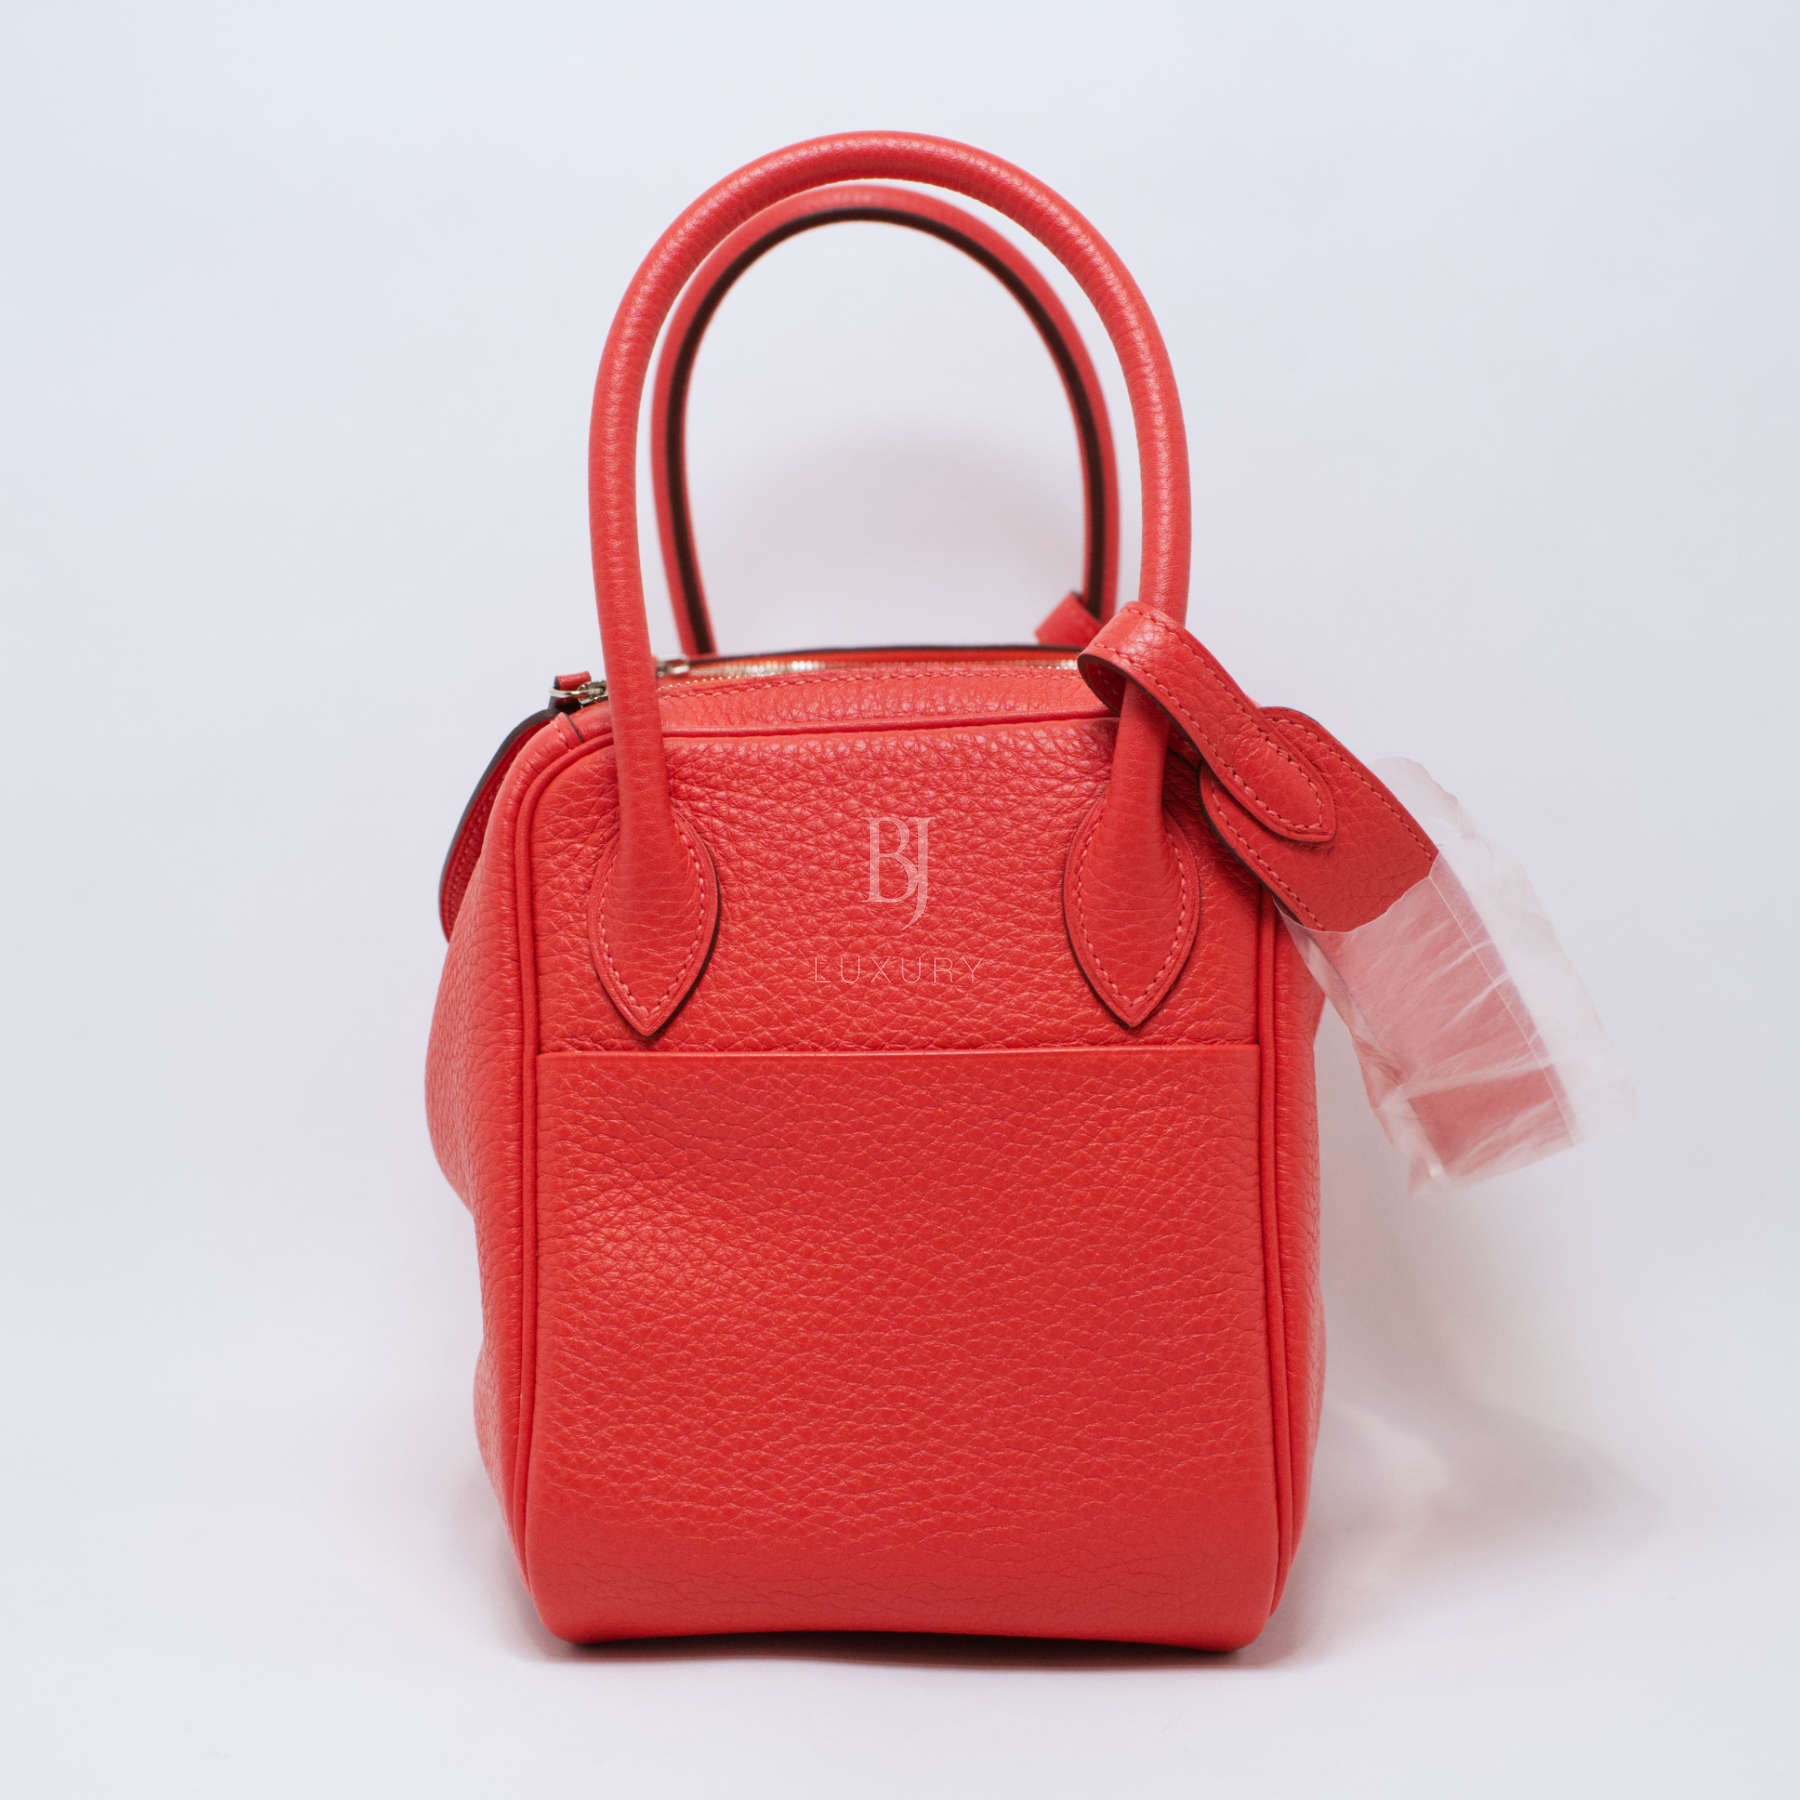 HERMES-LINDY-26-ROUGETOMATE-CLEMENCE-4812 side2.jpg